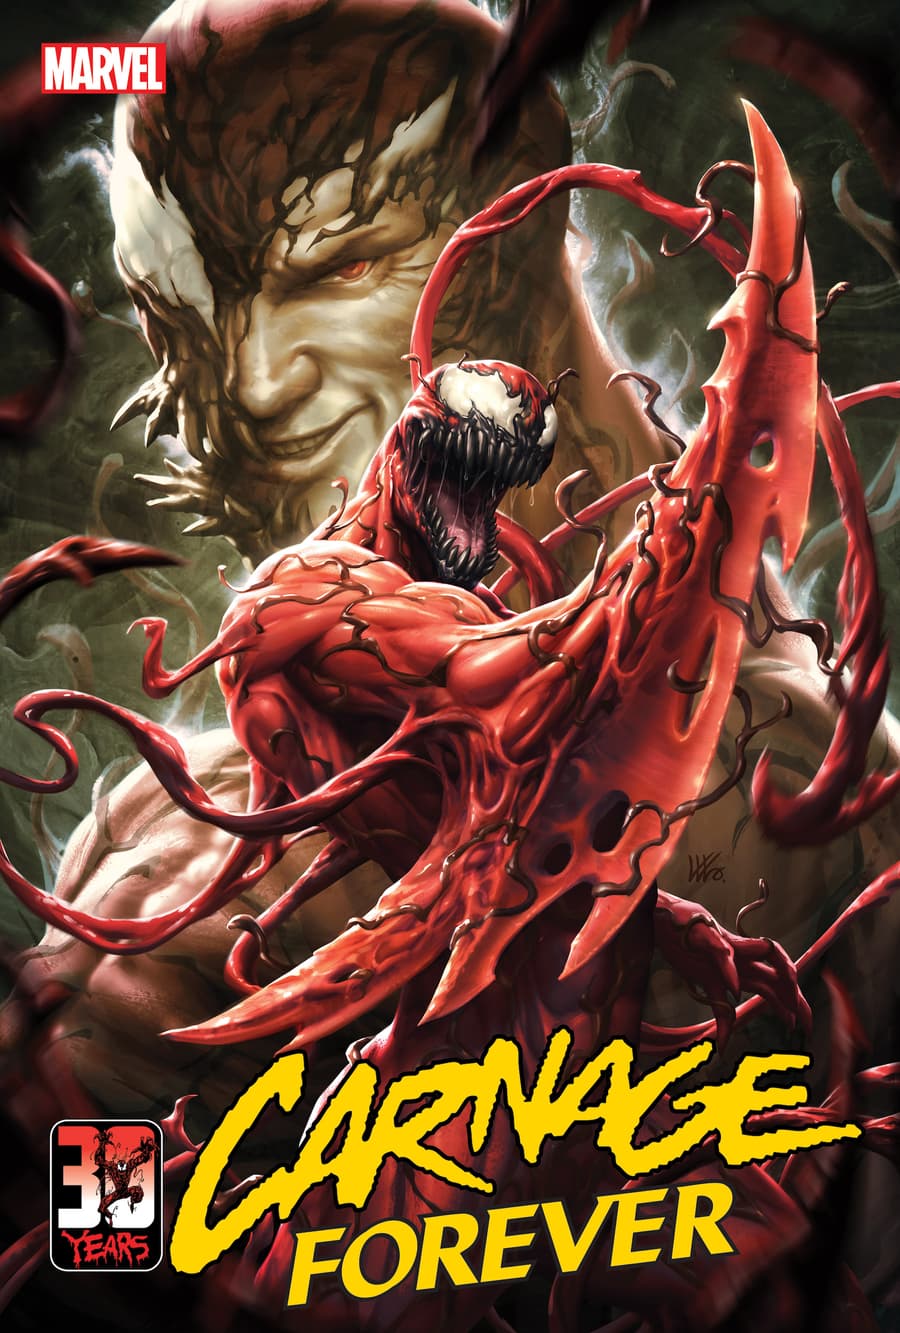 CARNAGE FOREVER #1 cover by Kendrick Lim